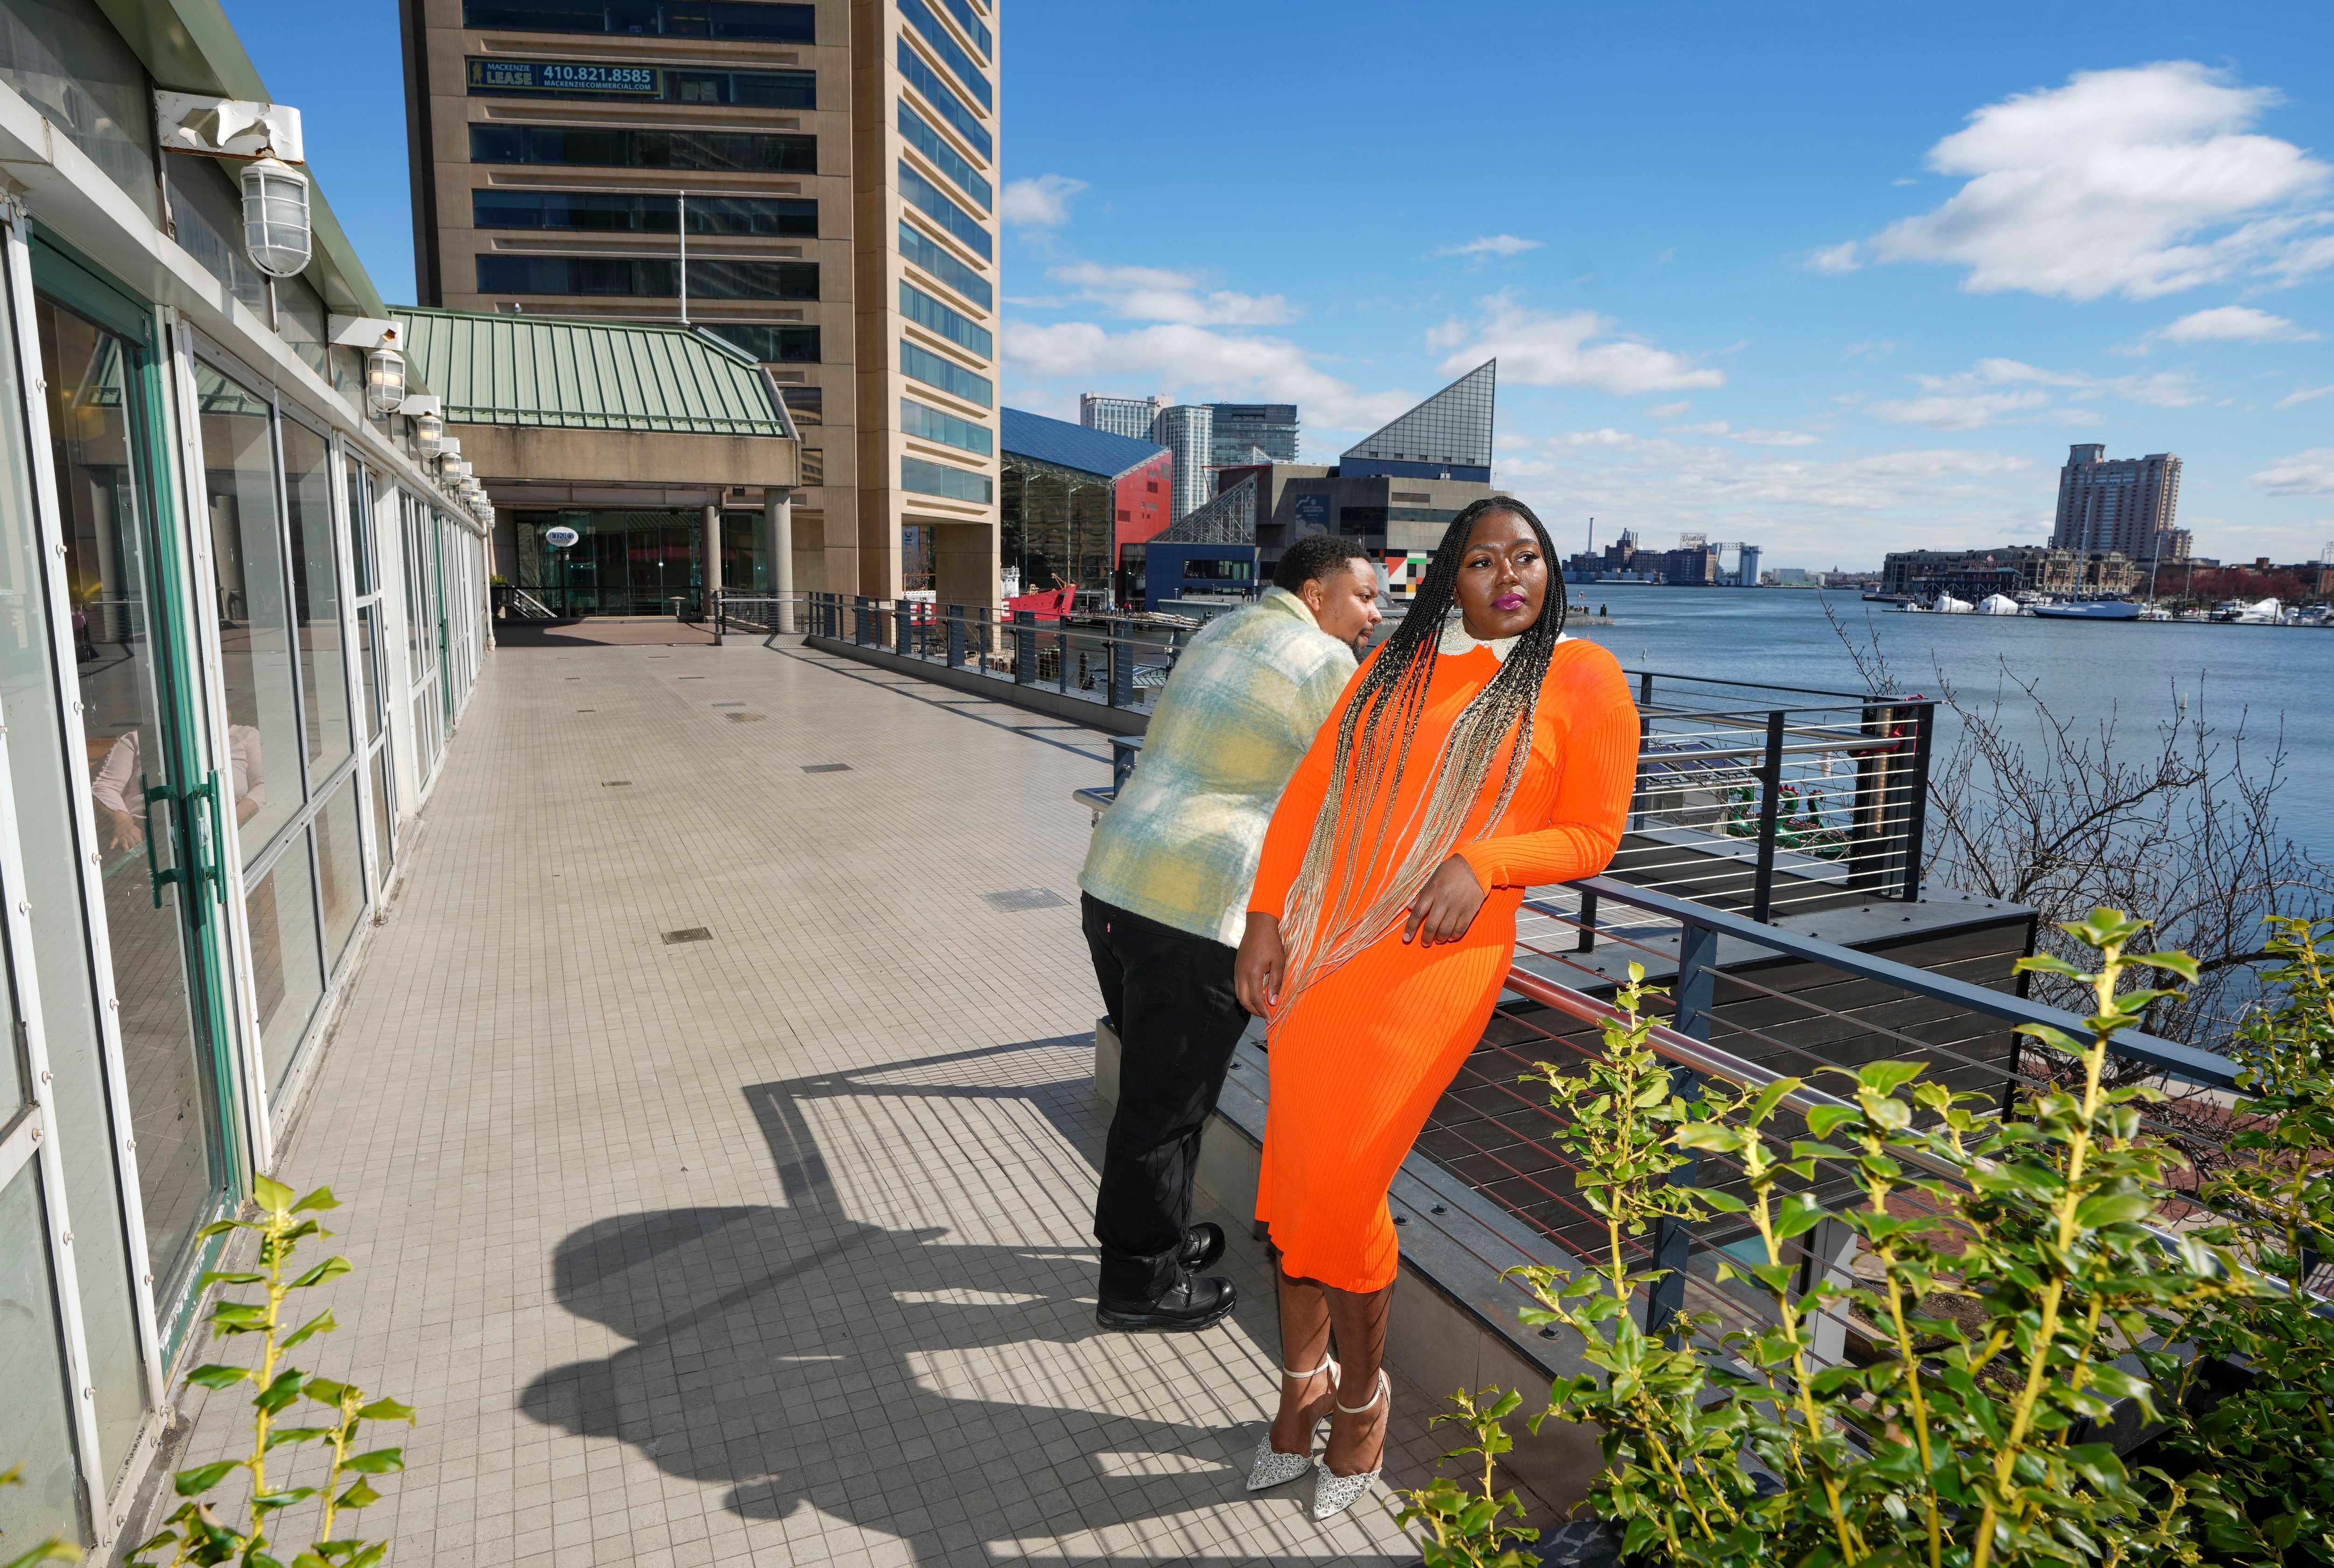 New business owner Amanda Mack takes in the view with her partner Jarrod Mack, stand on the balcony of her new retail space in the Harborplace shopping complex, in Baltimore, MD., on March 11, 2023.